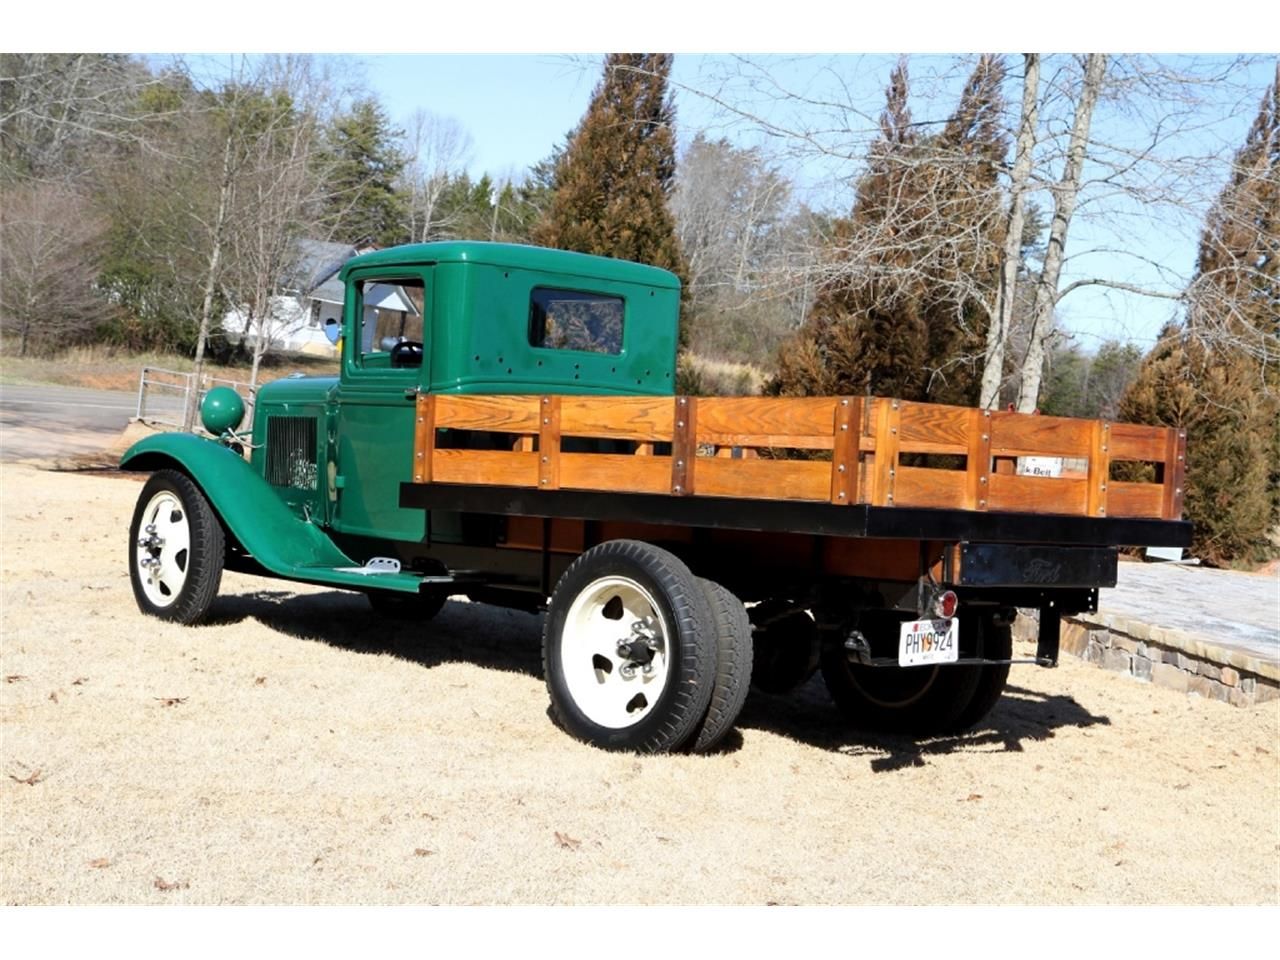 1932 Ford Flathead Pickup: The best pickup truck of the '30s.